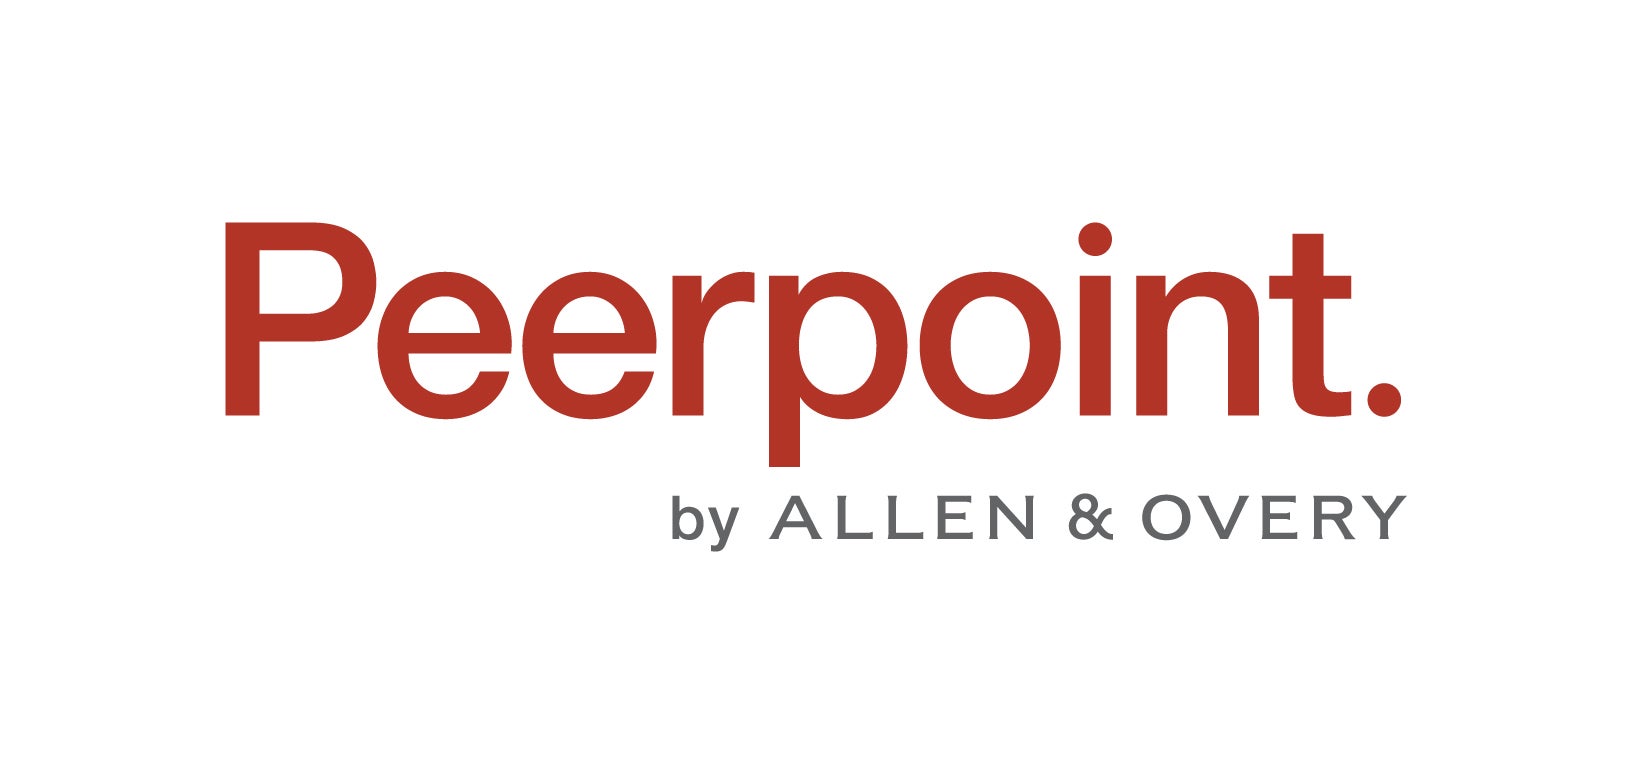 Peerpoint by Allen & Overy